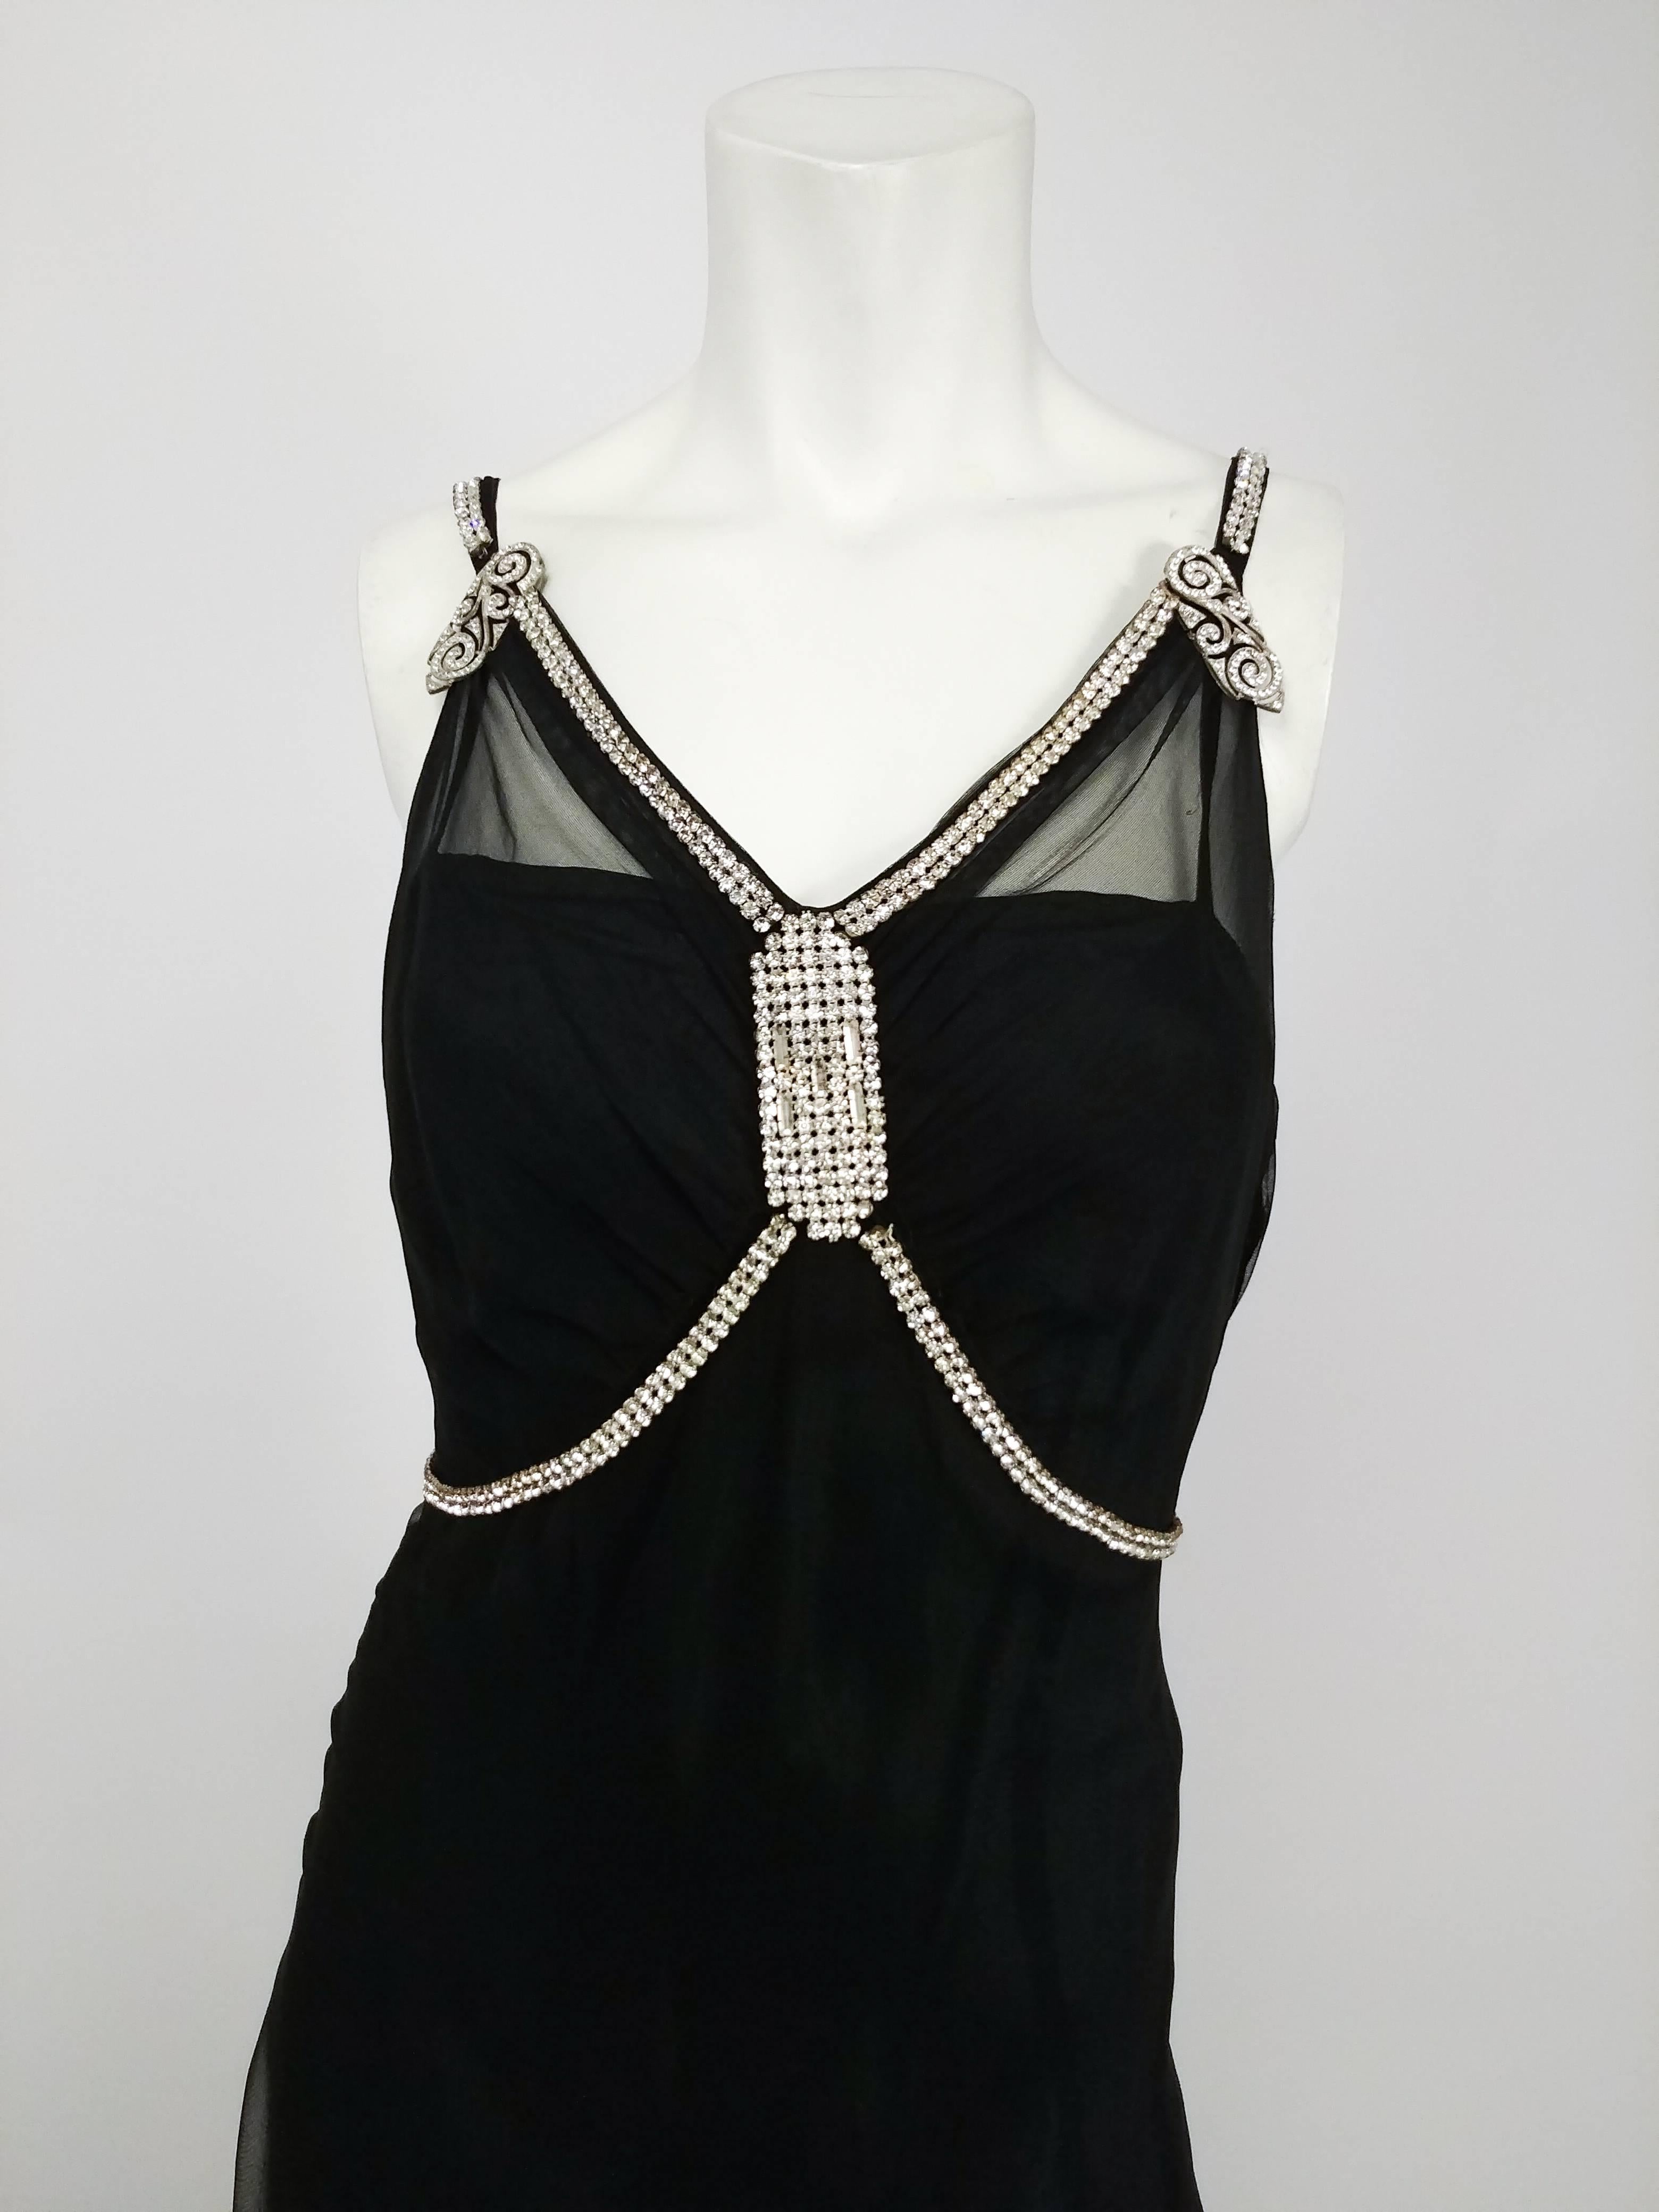 1930s Black Evening Gown w/ Rhinestone Detailing. Mesh overdress with rhinestone halter and art deco style embellishments at bust and straps. Snap closures at side. Comes with 1930s long black slip with low back. 